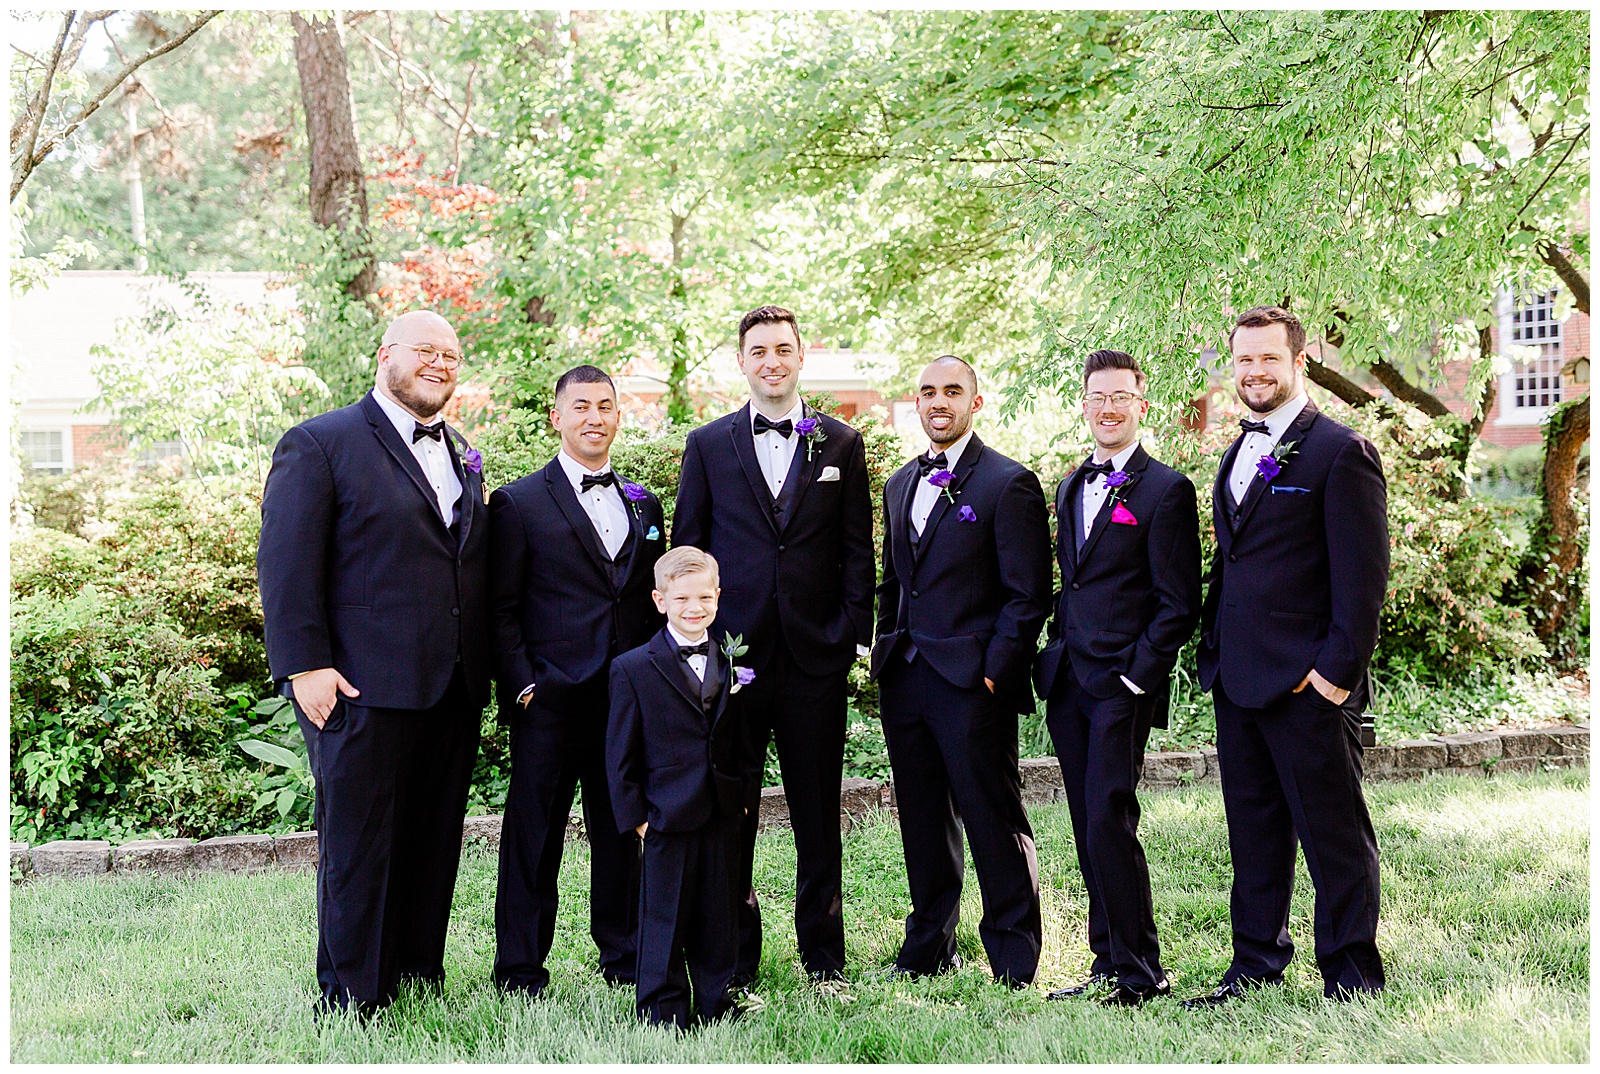 💍 groomsmen and groom group photo matching black tux tuxedos and ring boy 💍 Bright Colorful Summer City Wedding in Charlotte, NC with Taryn and Ryan | Kevyn Dixon Photography